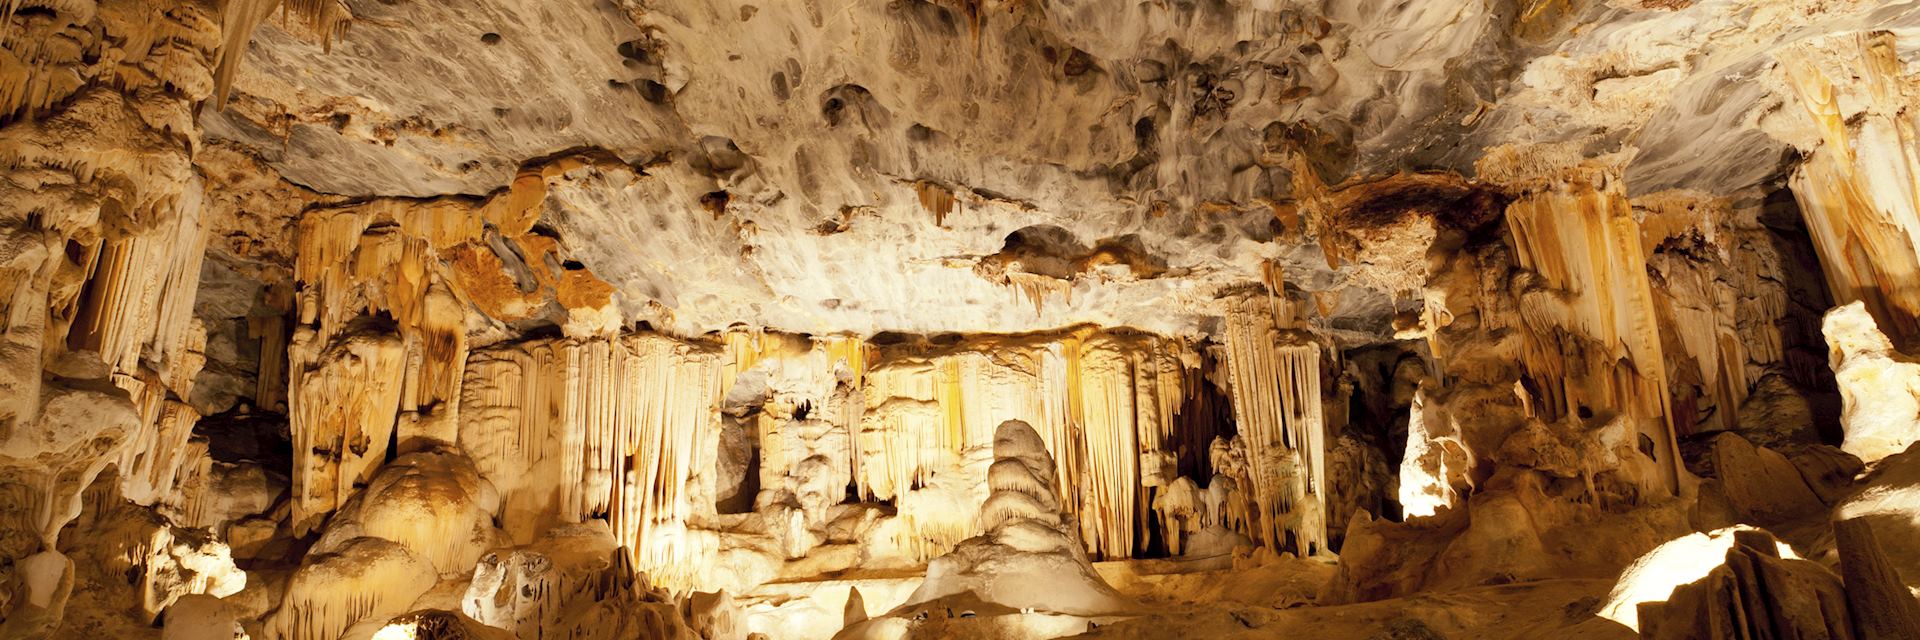 Cango Caves, South Africa